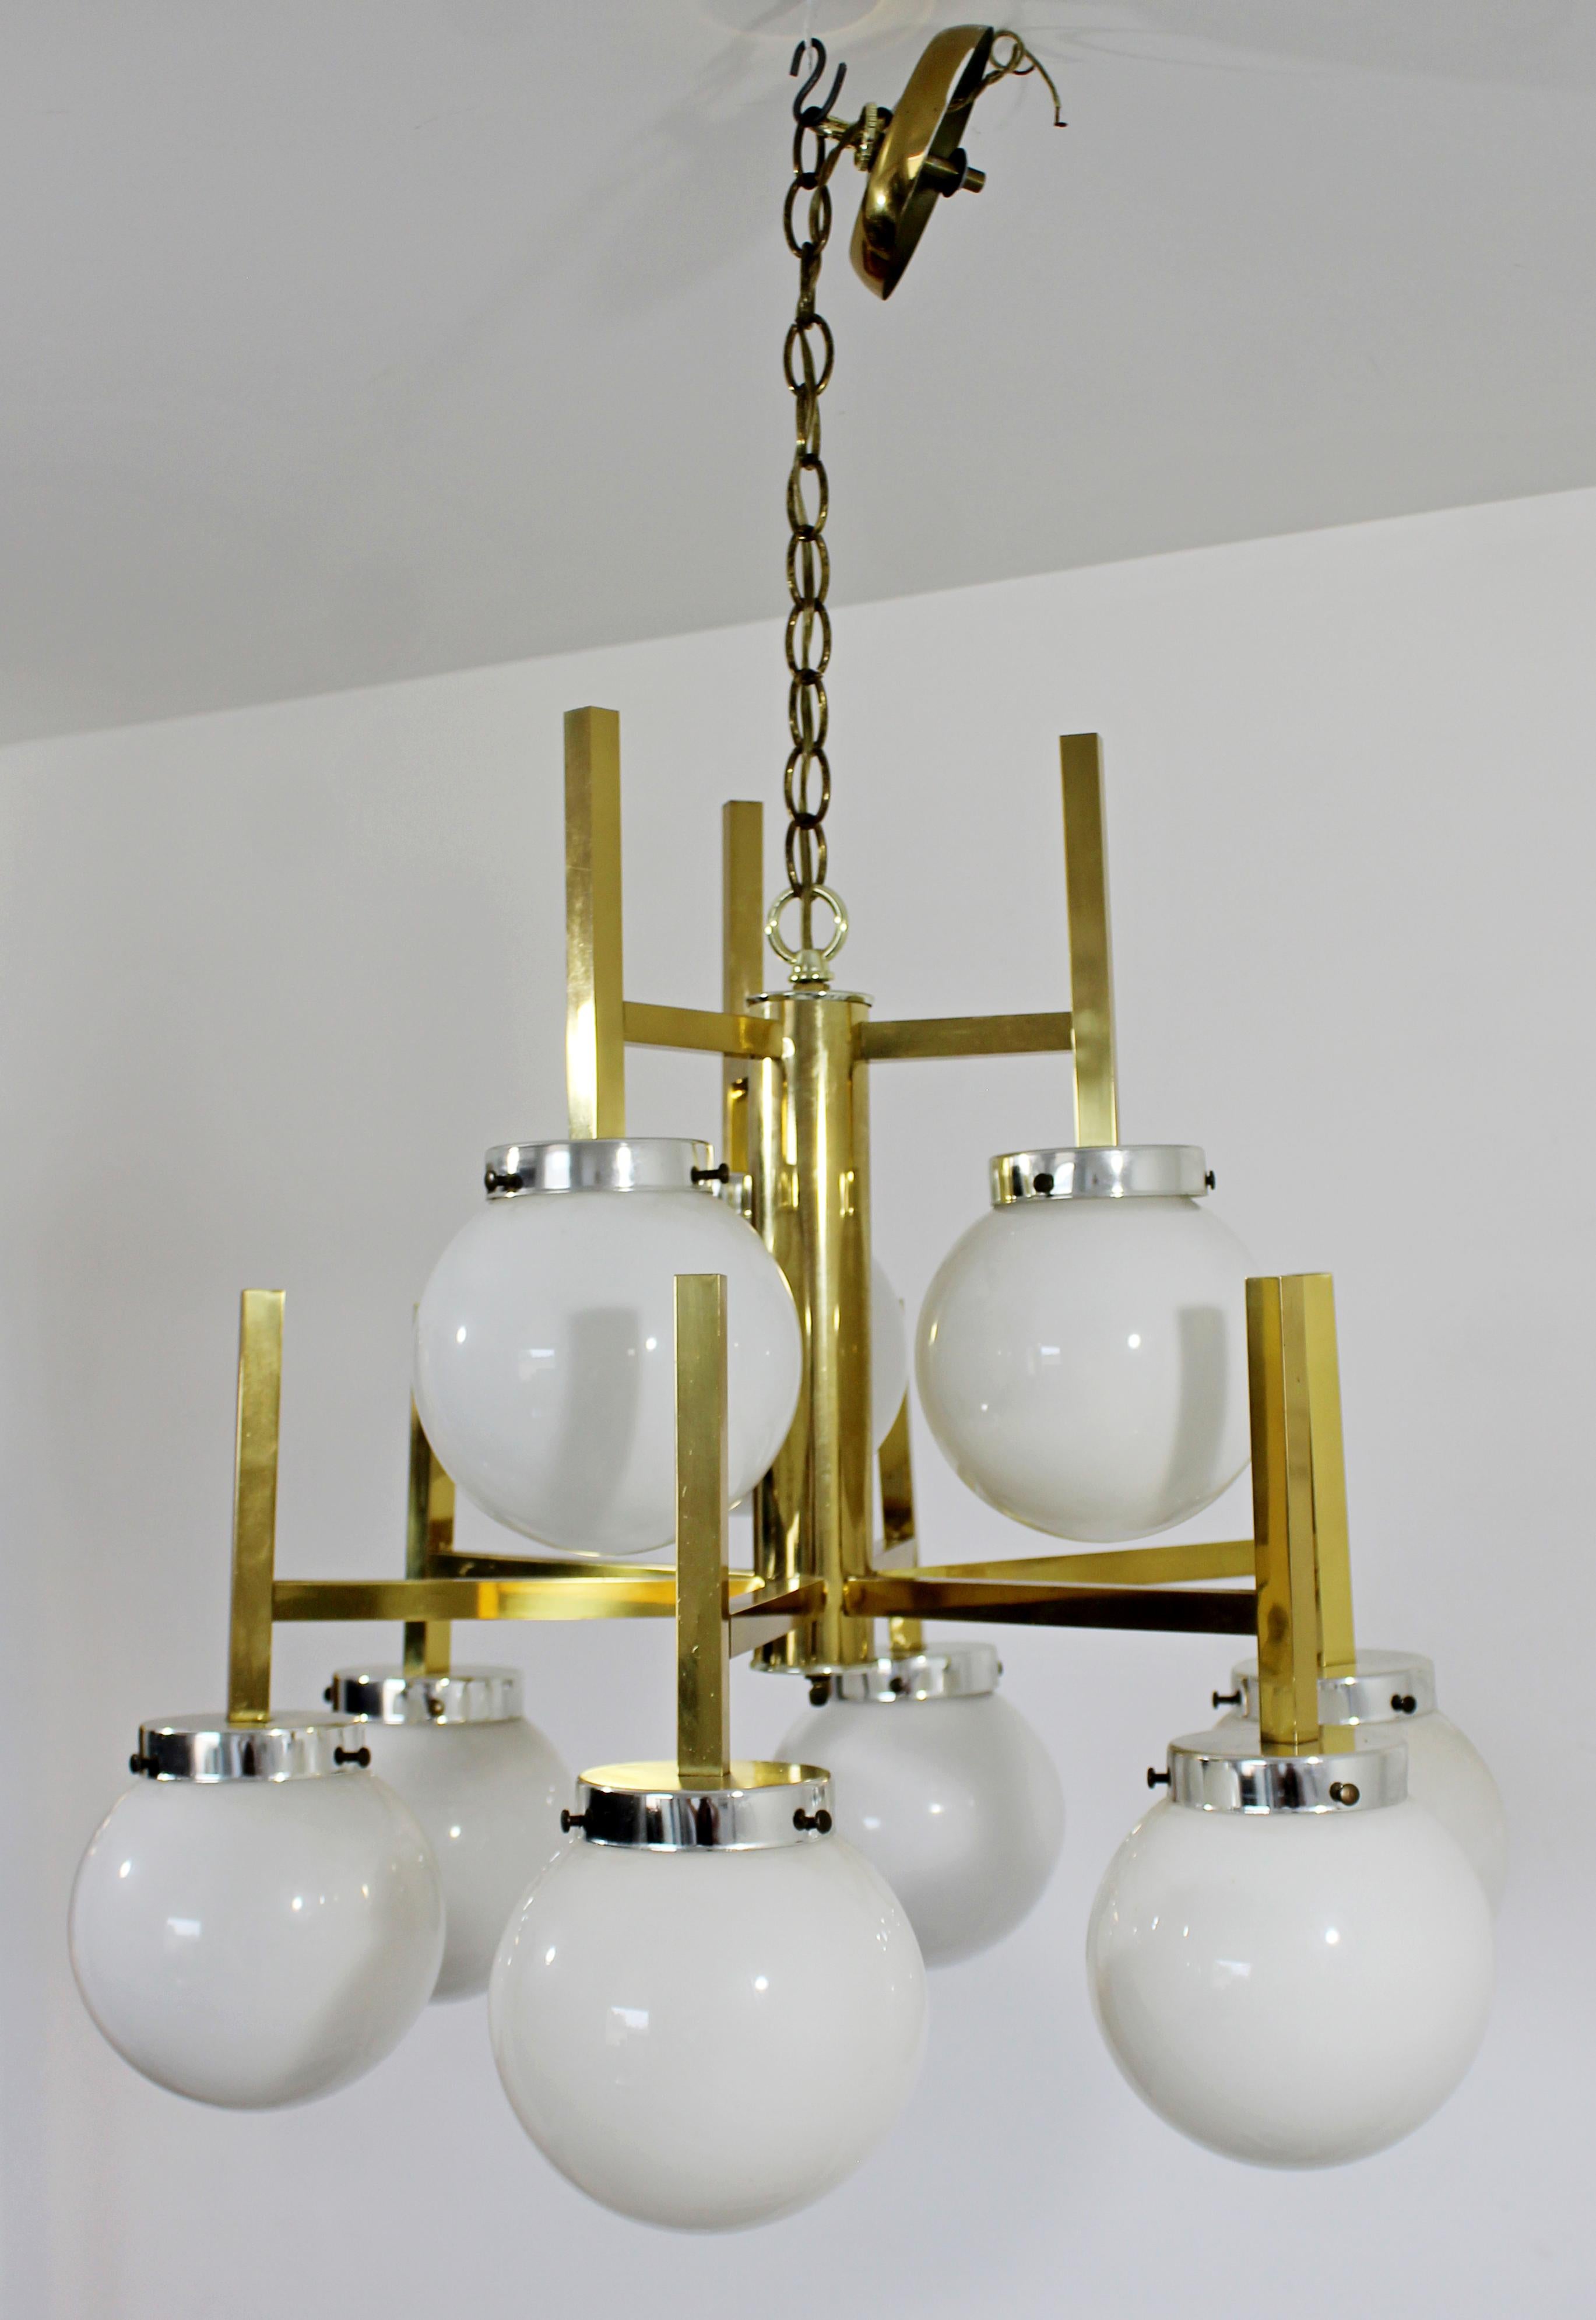 For your consideration is a brilliant, brass light fixture chandelier, with nine white glass bulbs, by Robert Sonneman, circa 1960s. In very good vintage condition. The dimensions are 24